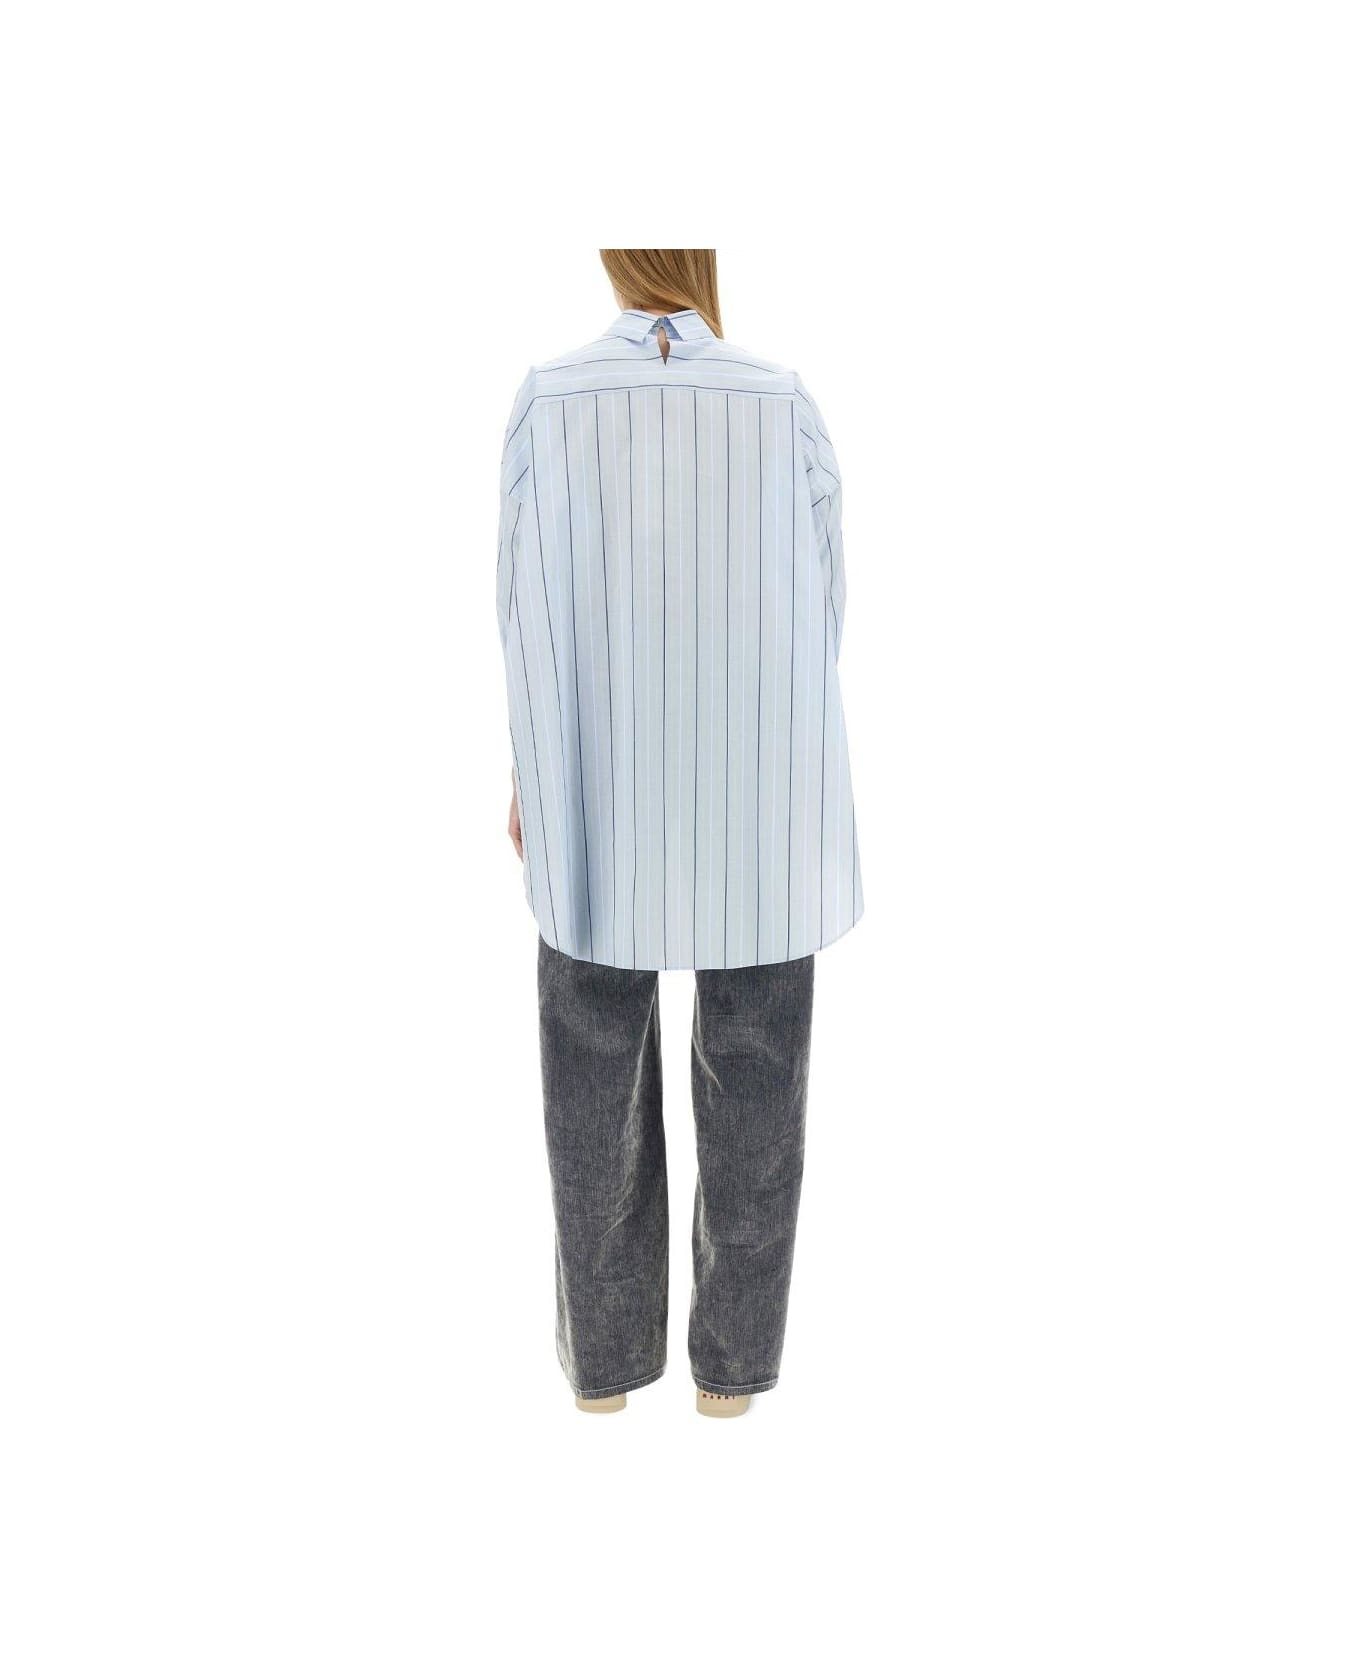 Marni Logo Embroidered Striped Shirt - Clear Blue シャツ